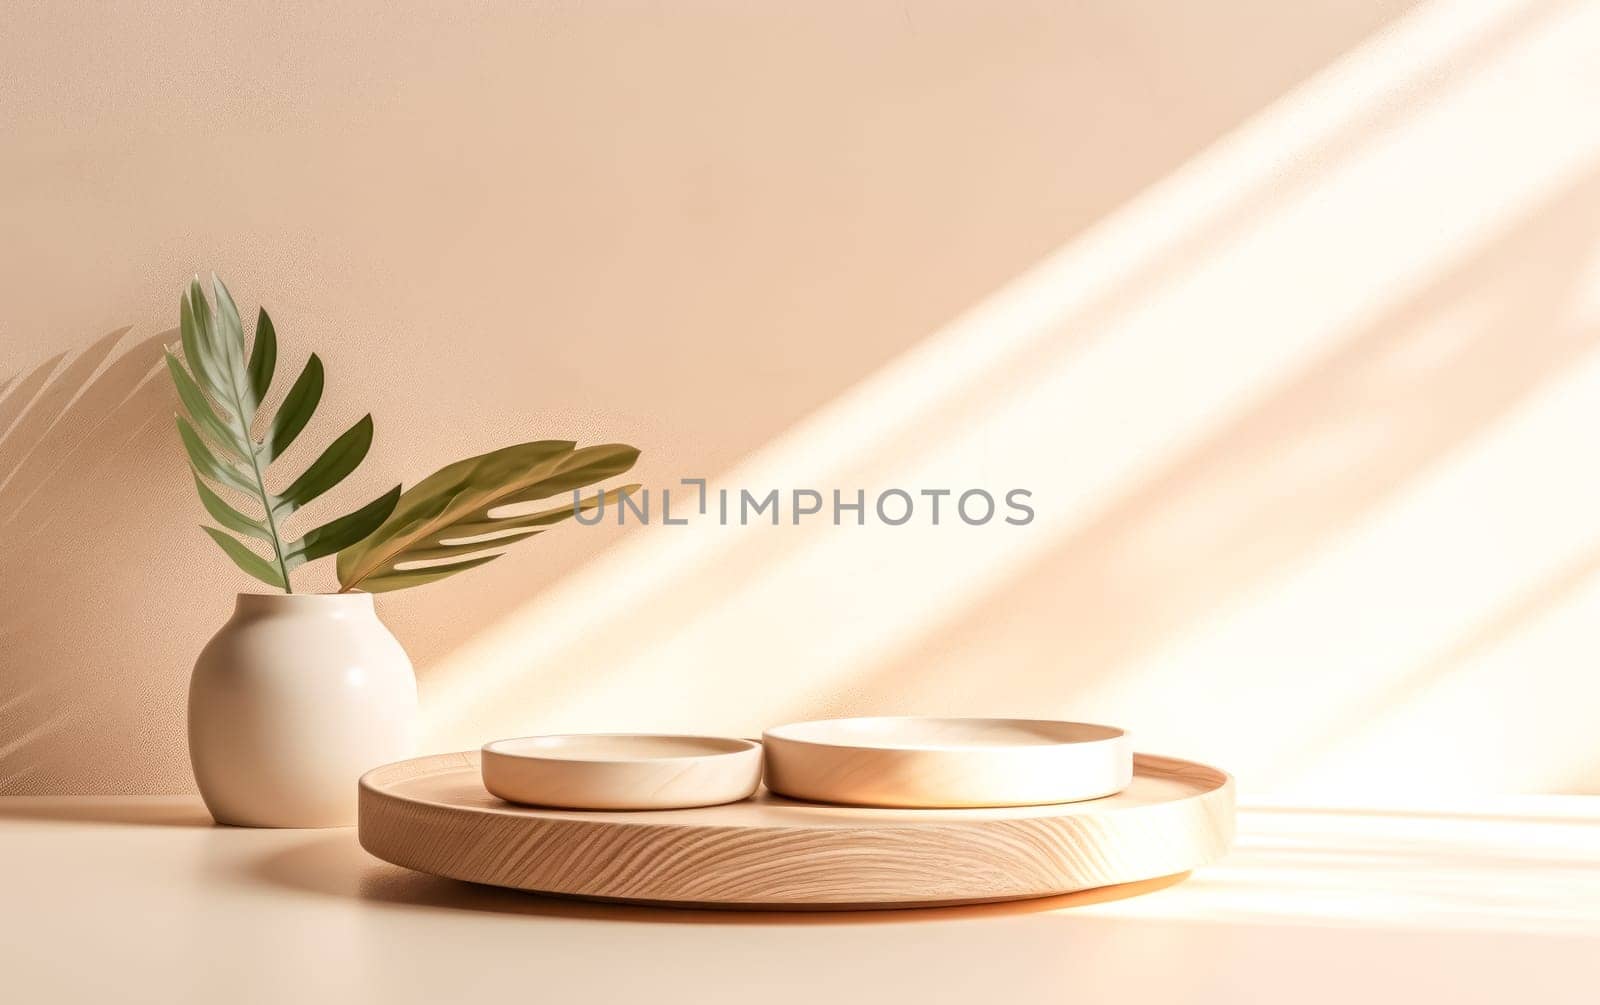 A white table with a wooden tray and three plates on it, creating a minimalist and stylish dining setup.